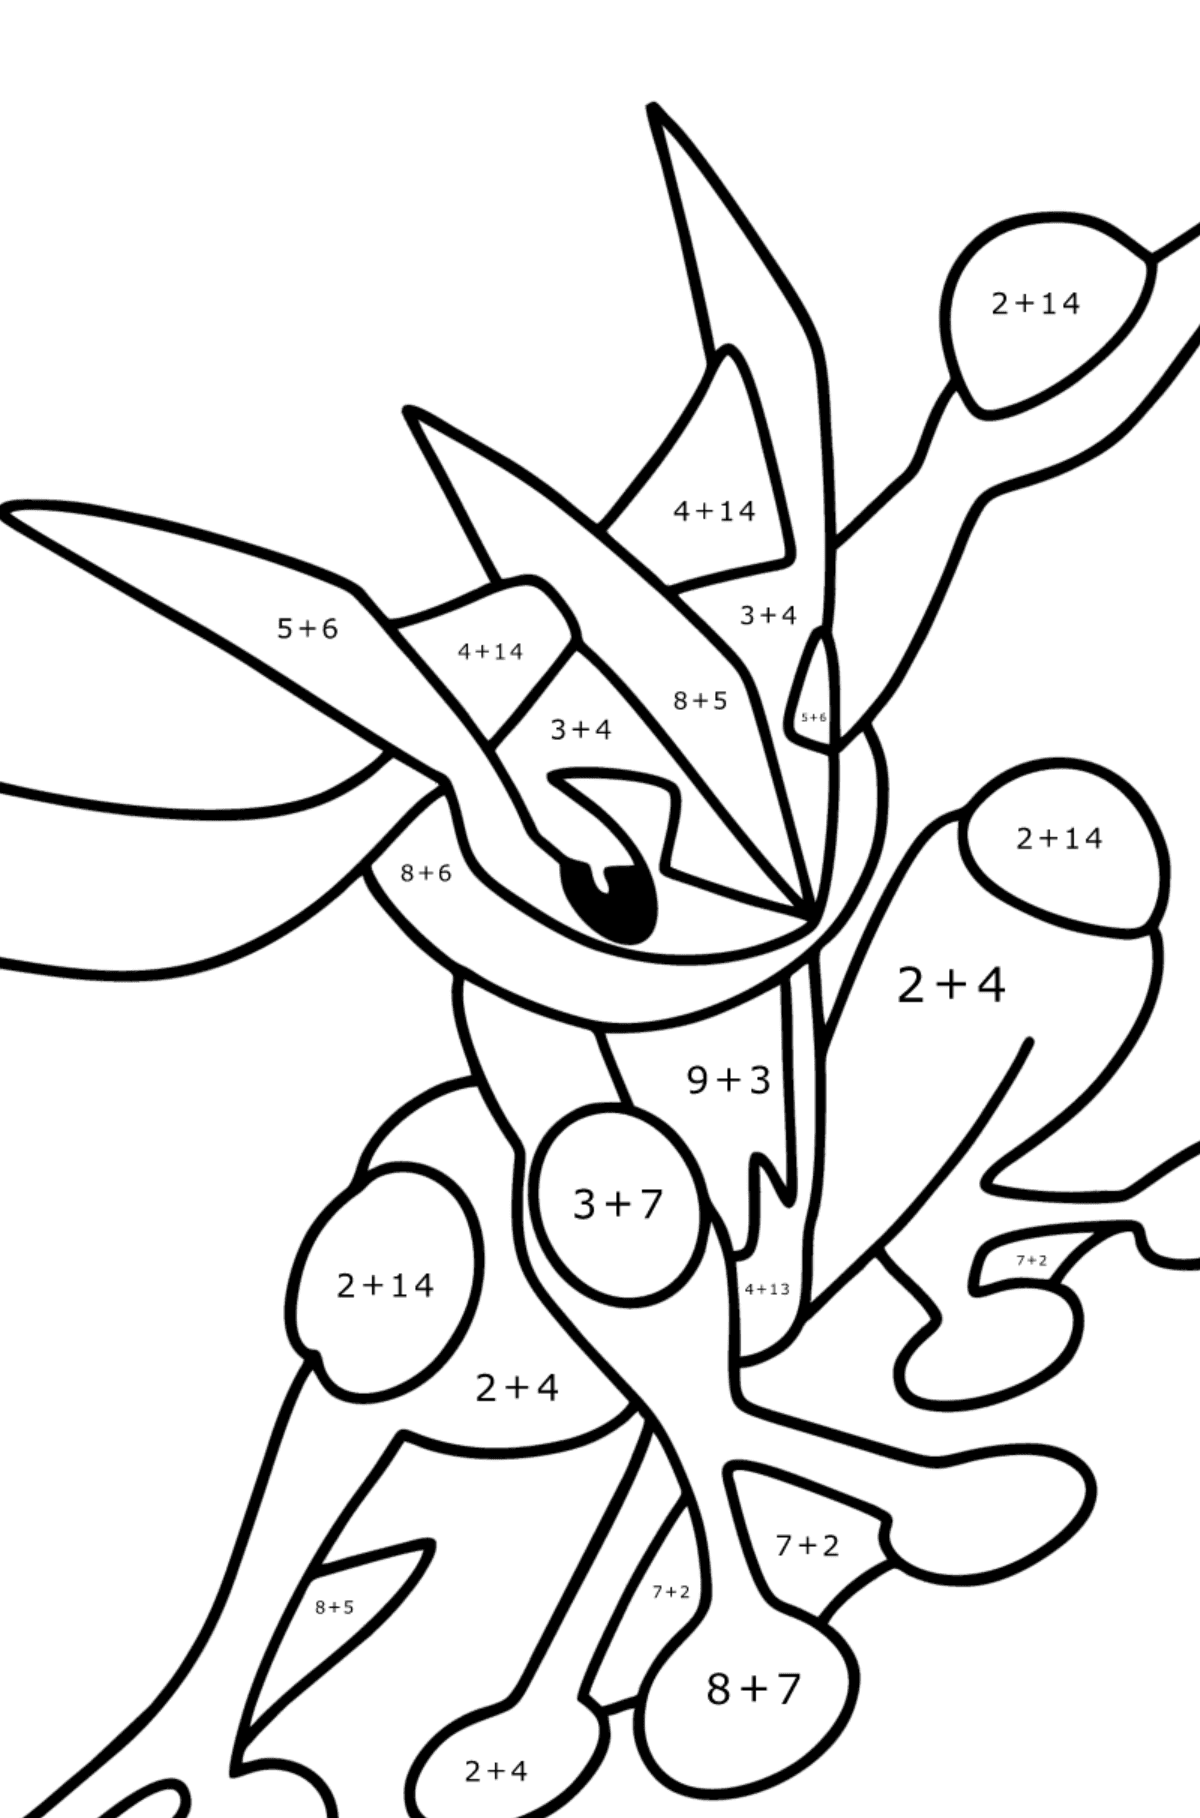 Coloring page Pokemon Go Greninja - Math Coloring - Addition for Kids